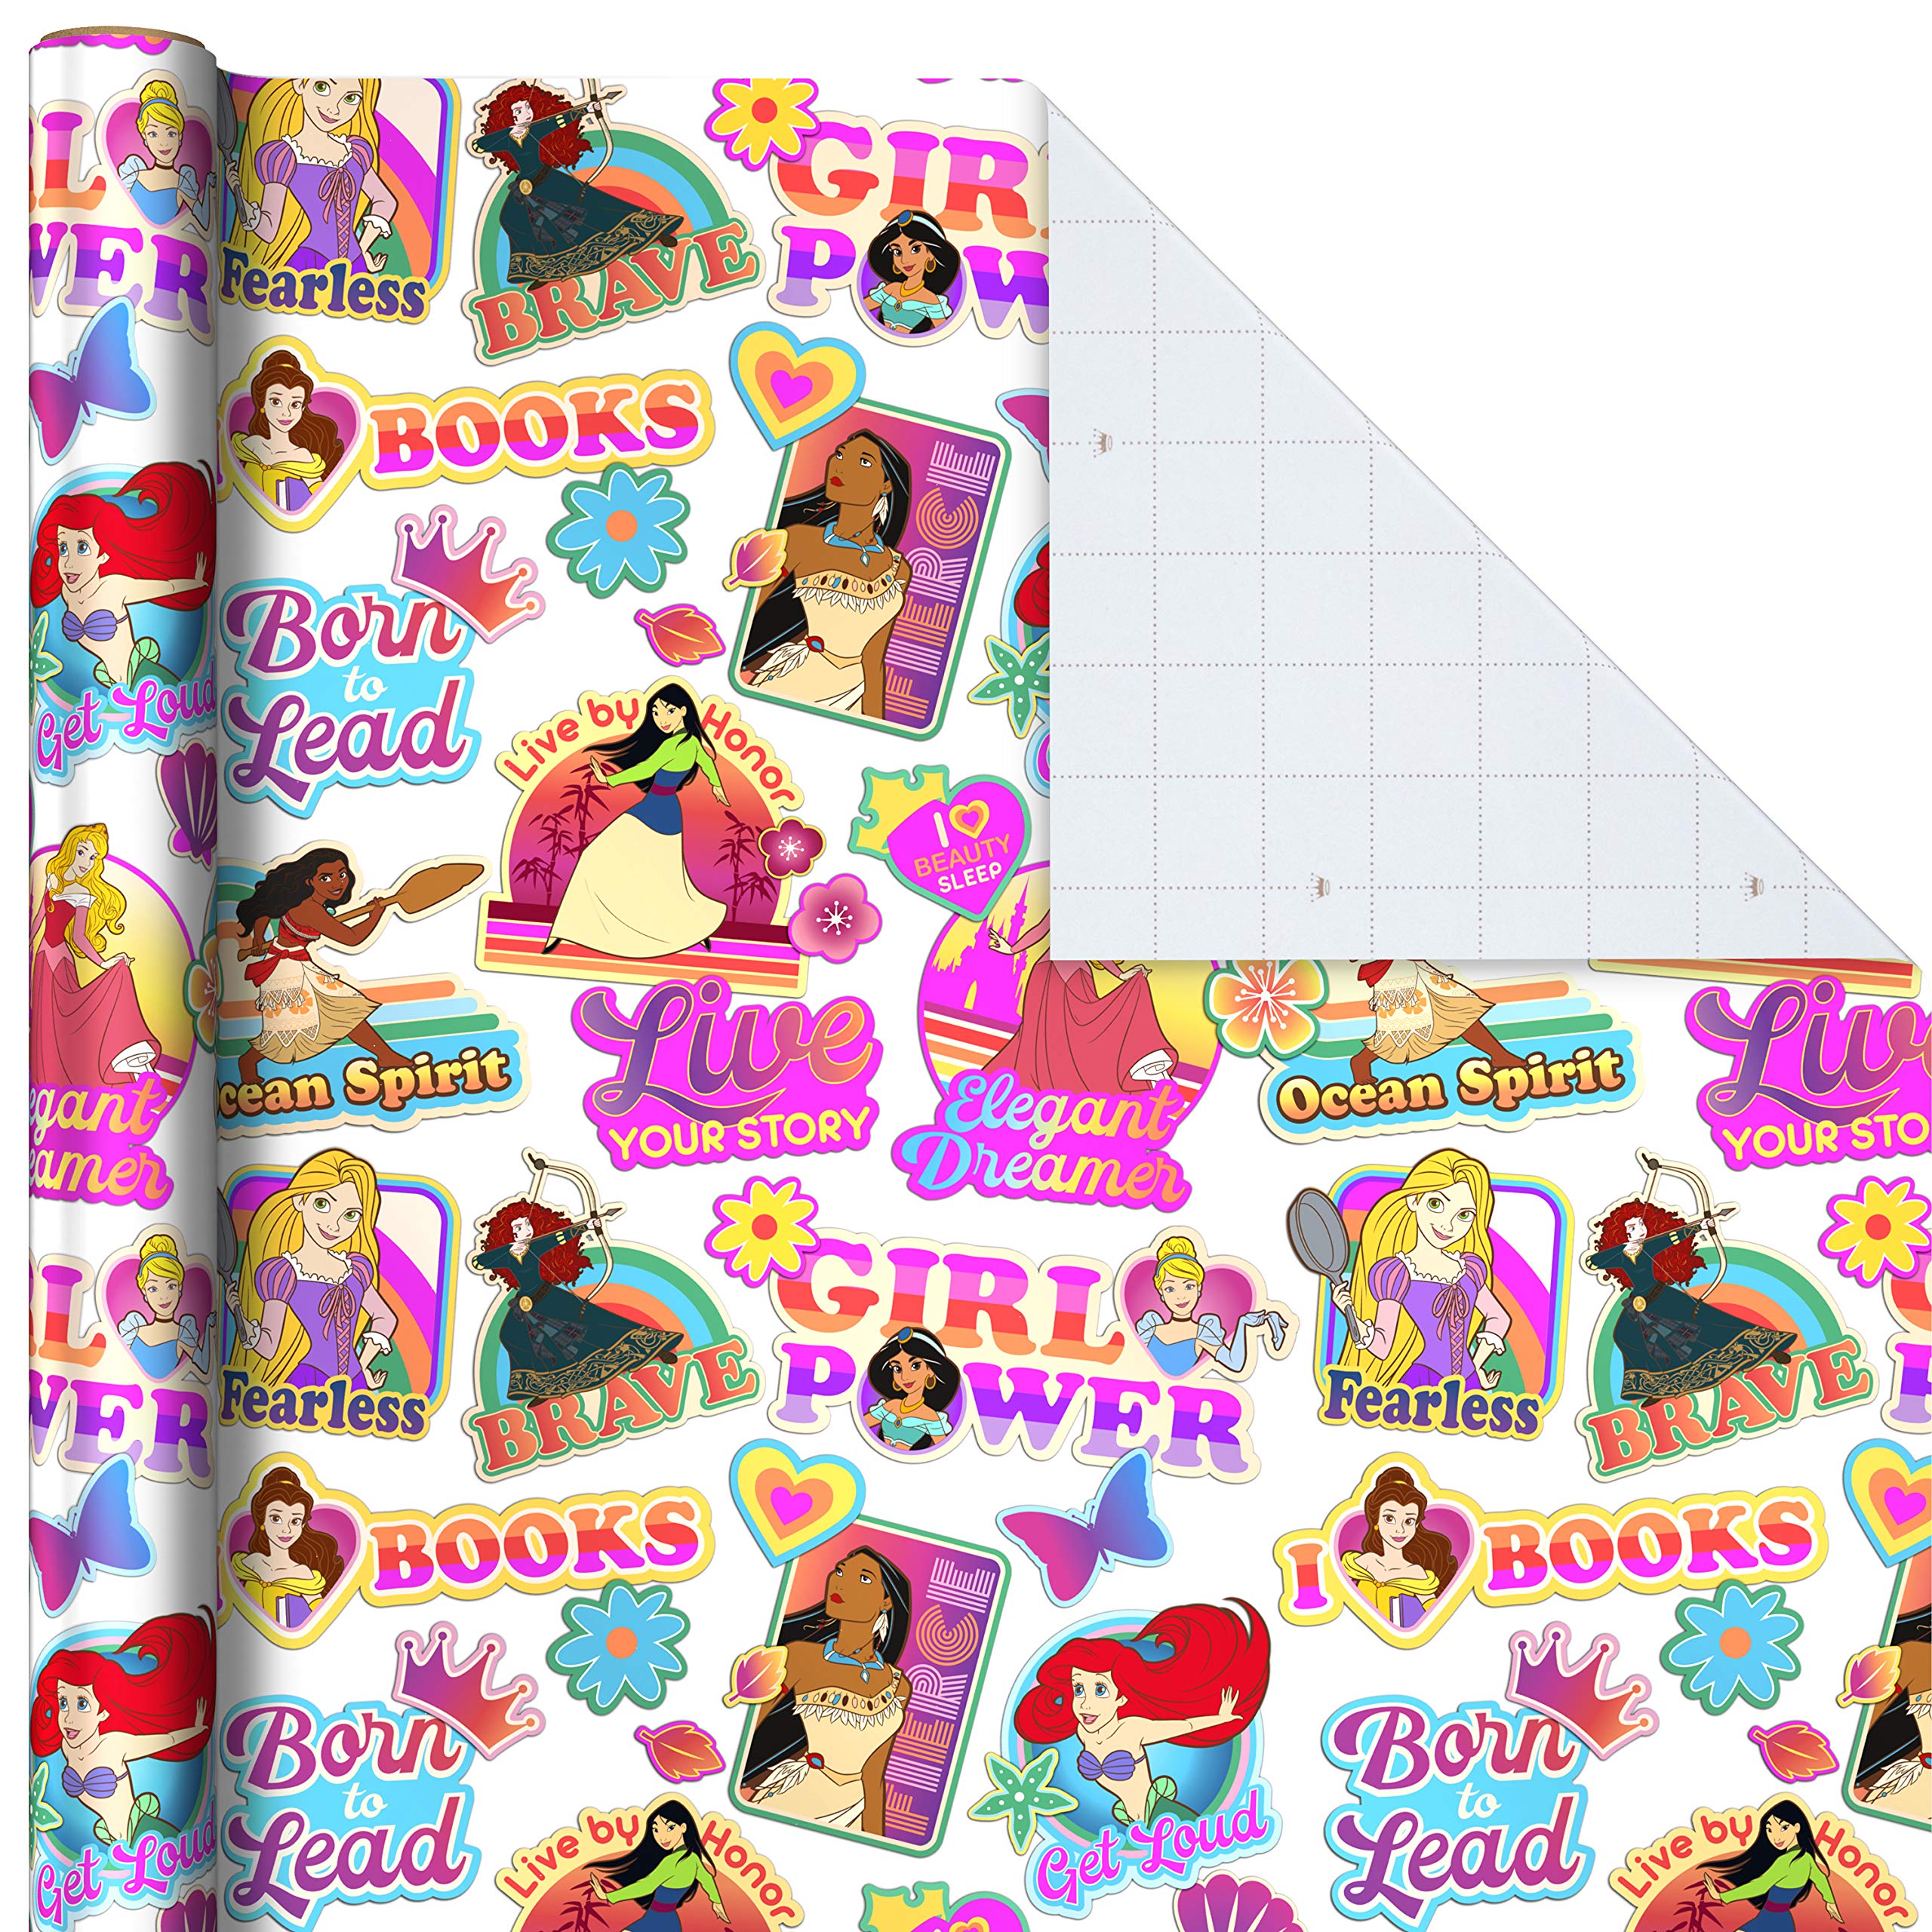 Hallmark Disney Princess Wrapping Paper with Cut Lines (Pack of 3, 60 sq. ft. ttl.) with Cinderella, Ariel, Mulan, Jasmine, Snow White and Belle for Birthdays, Christmas or Any Occasion